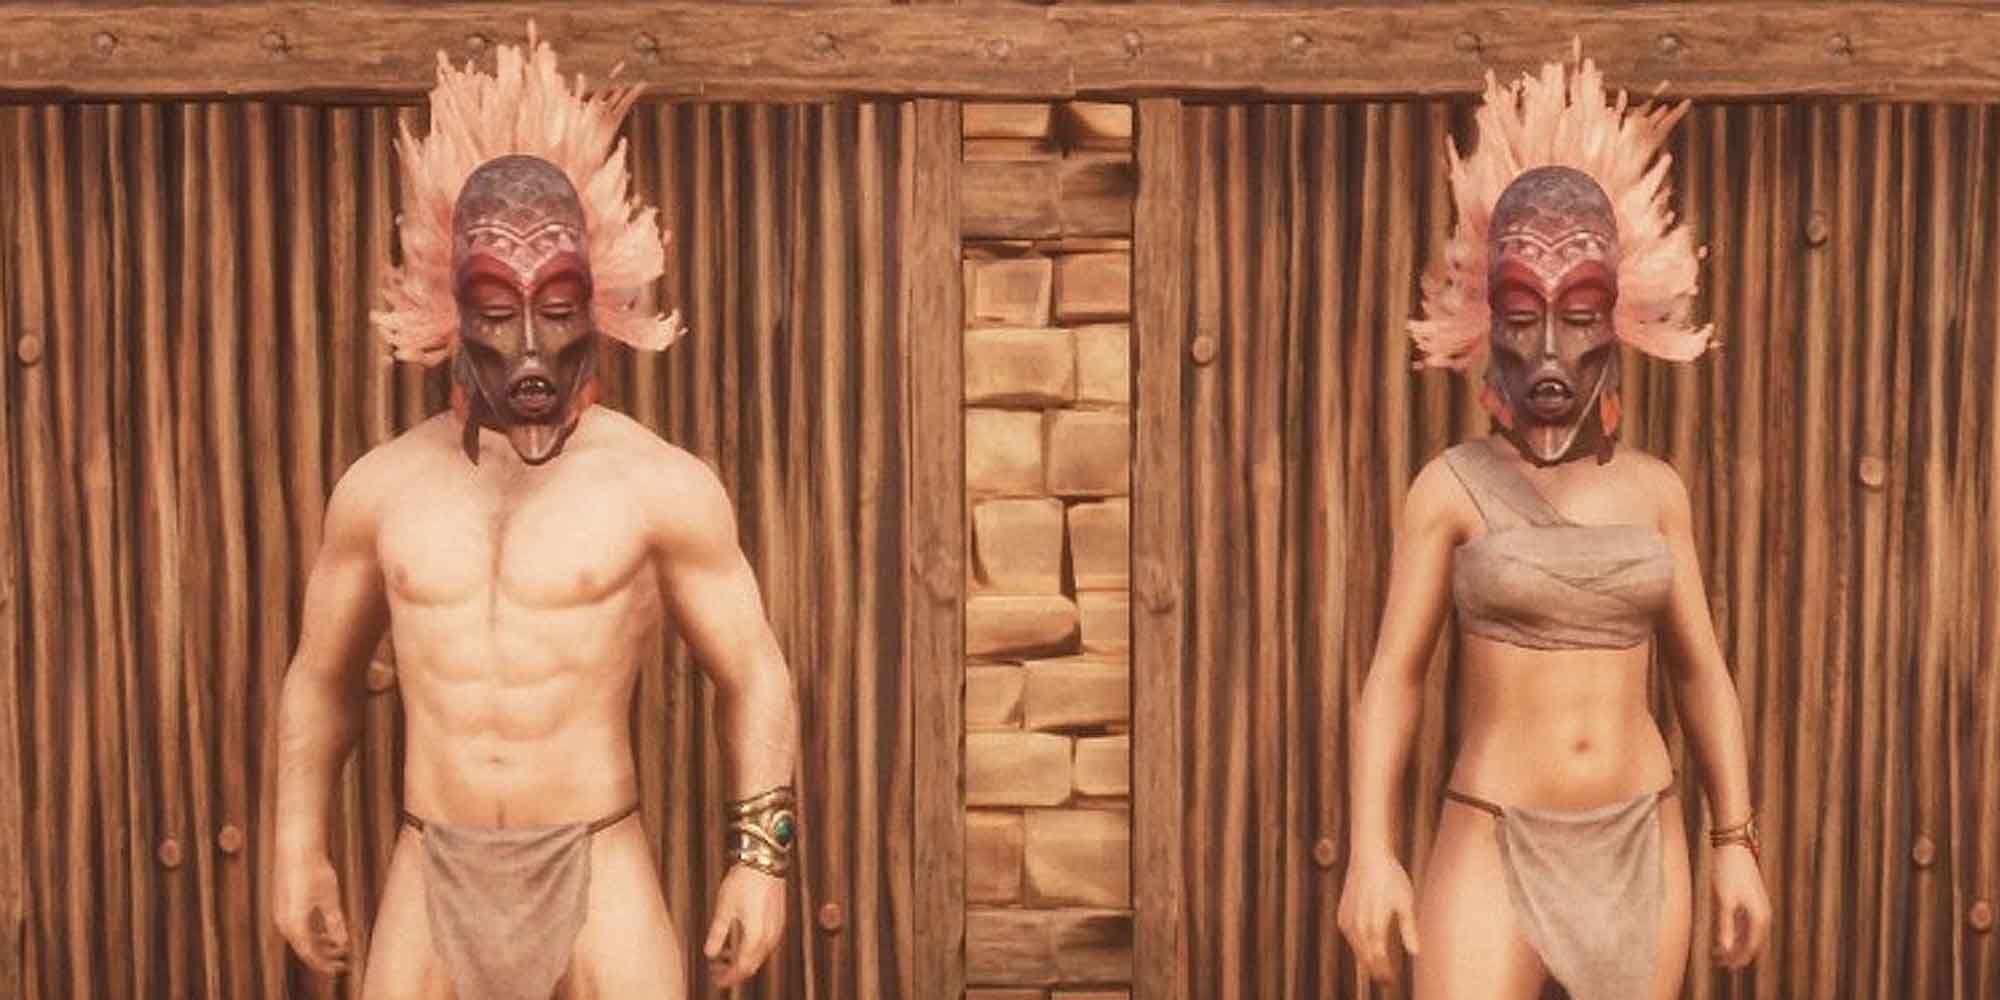 The Night Stalker Mask in Conan Exiles